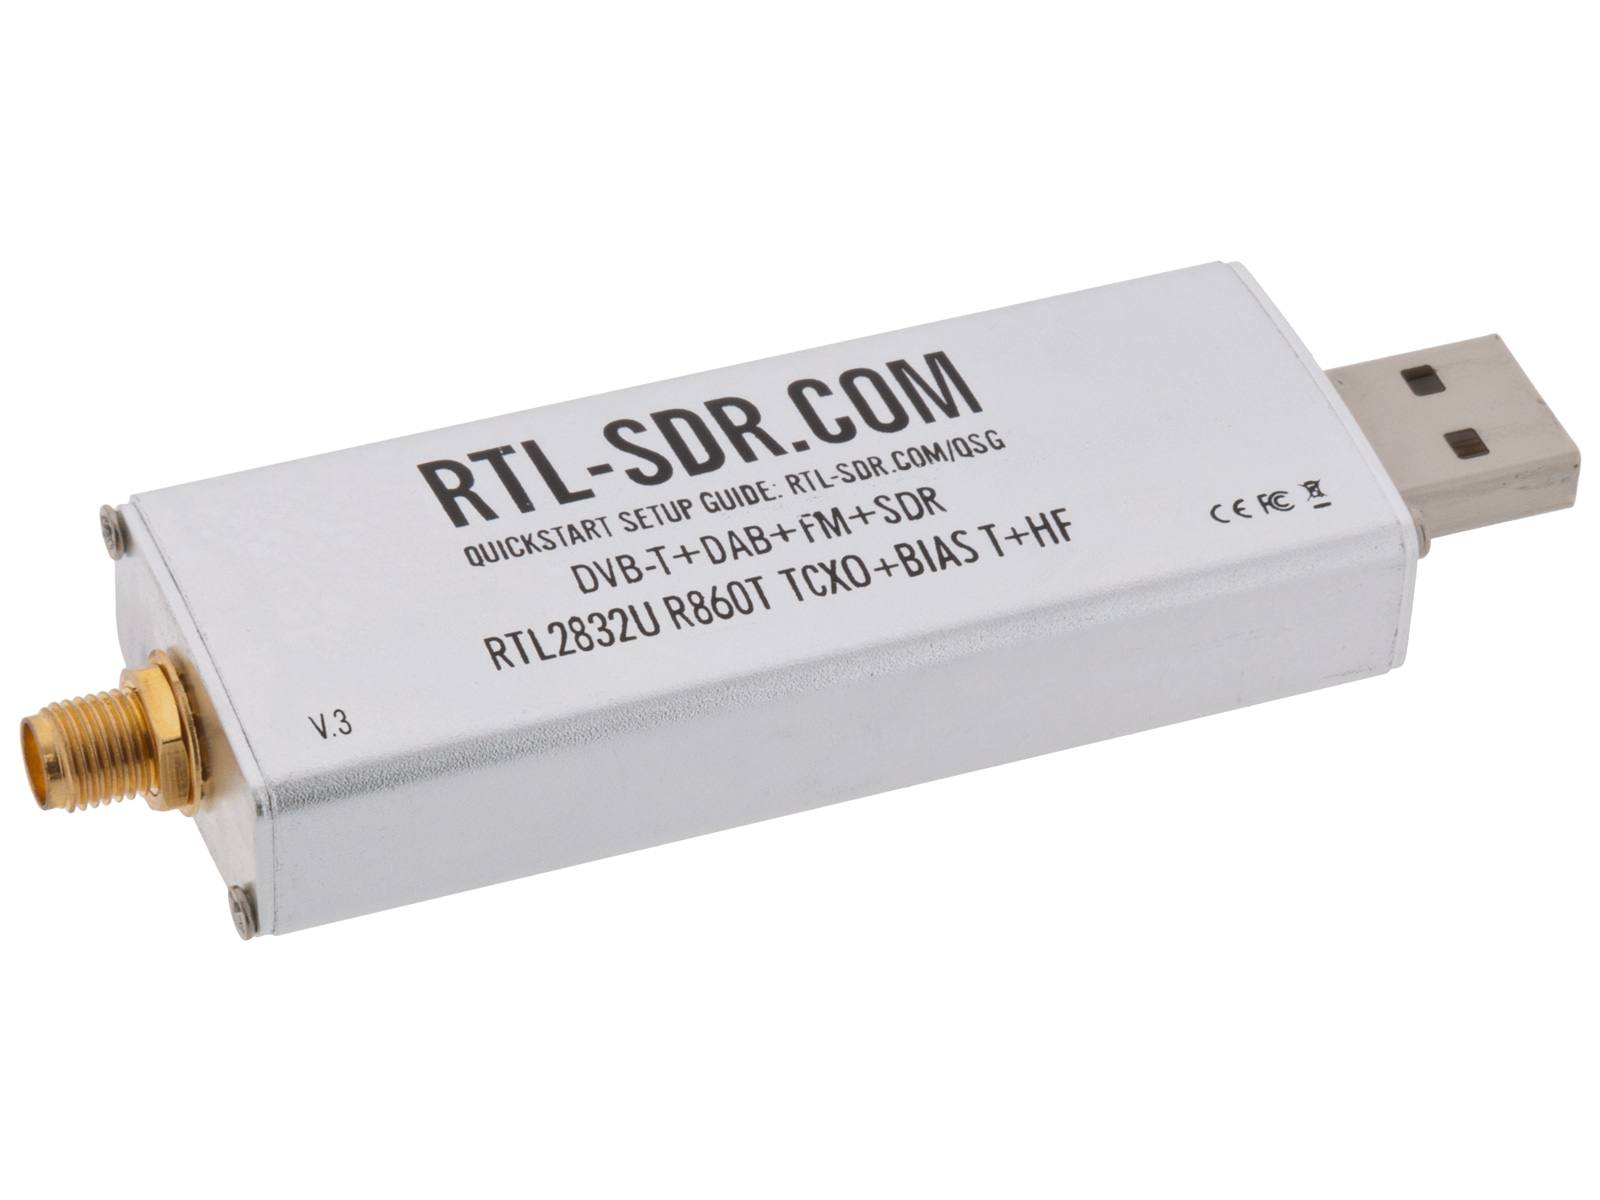 Buy RTL-SDR receiver dongle (v3) at the right price @ electrokit